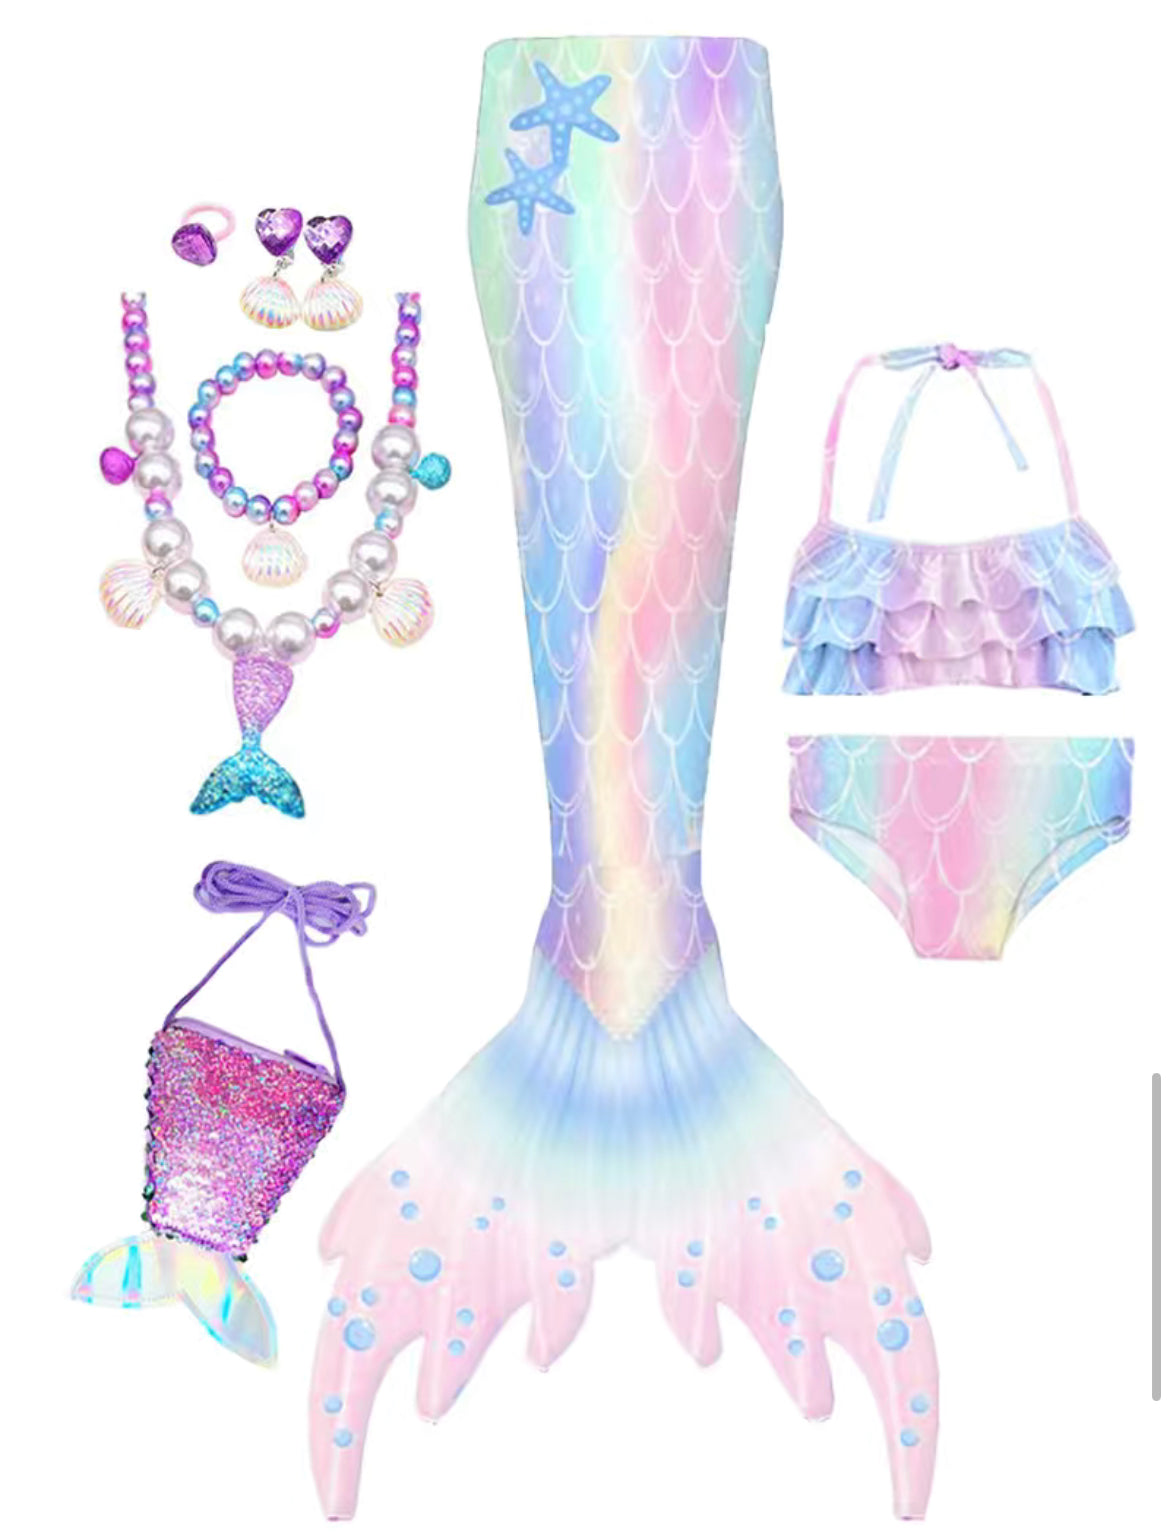 I’m a Mermaid Swimsuit, Tail & Accessories